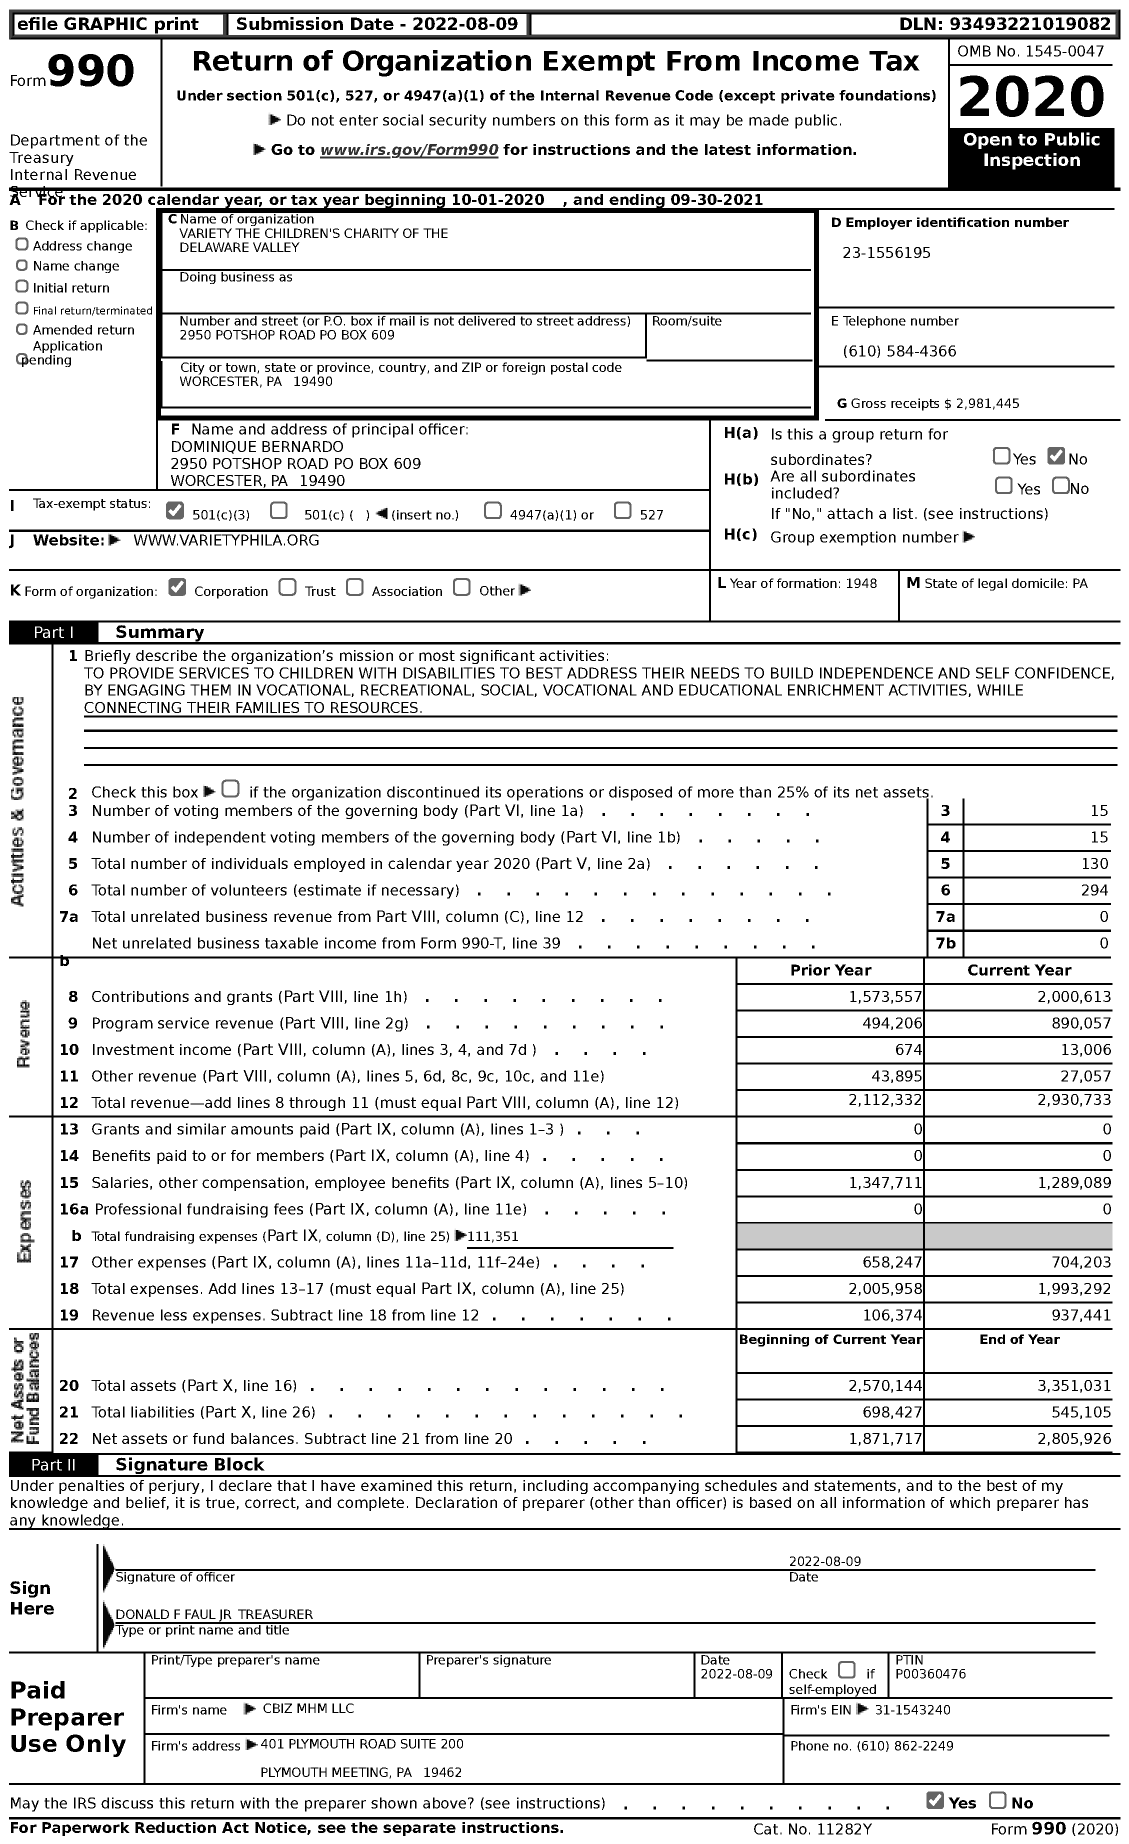 Image of first page of 2020 Form 990 for Variety the Children's Charity of the Delaware Valley